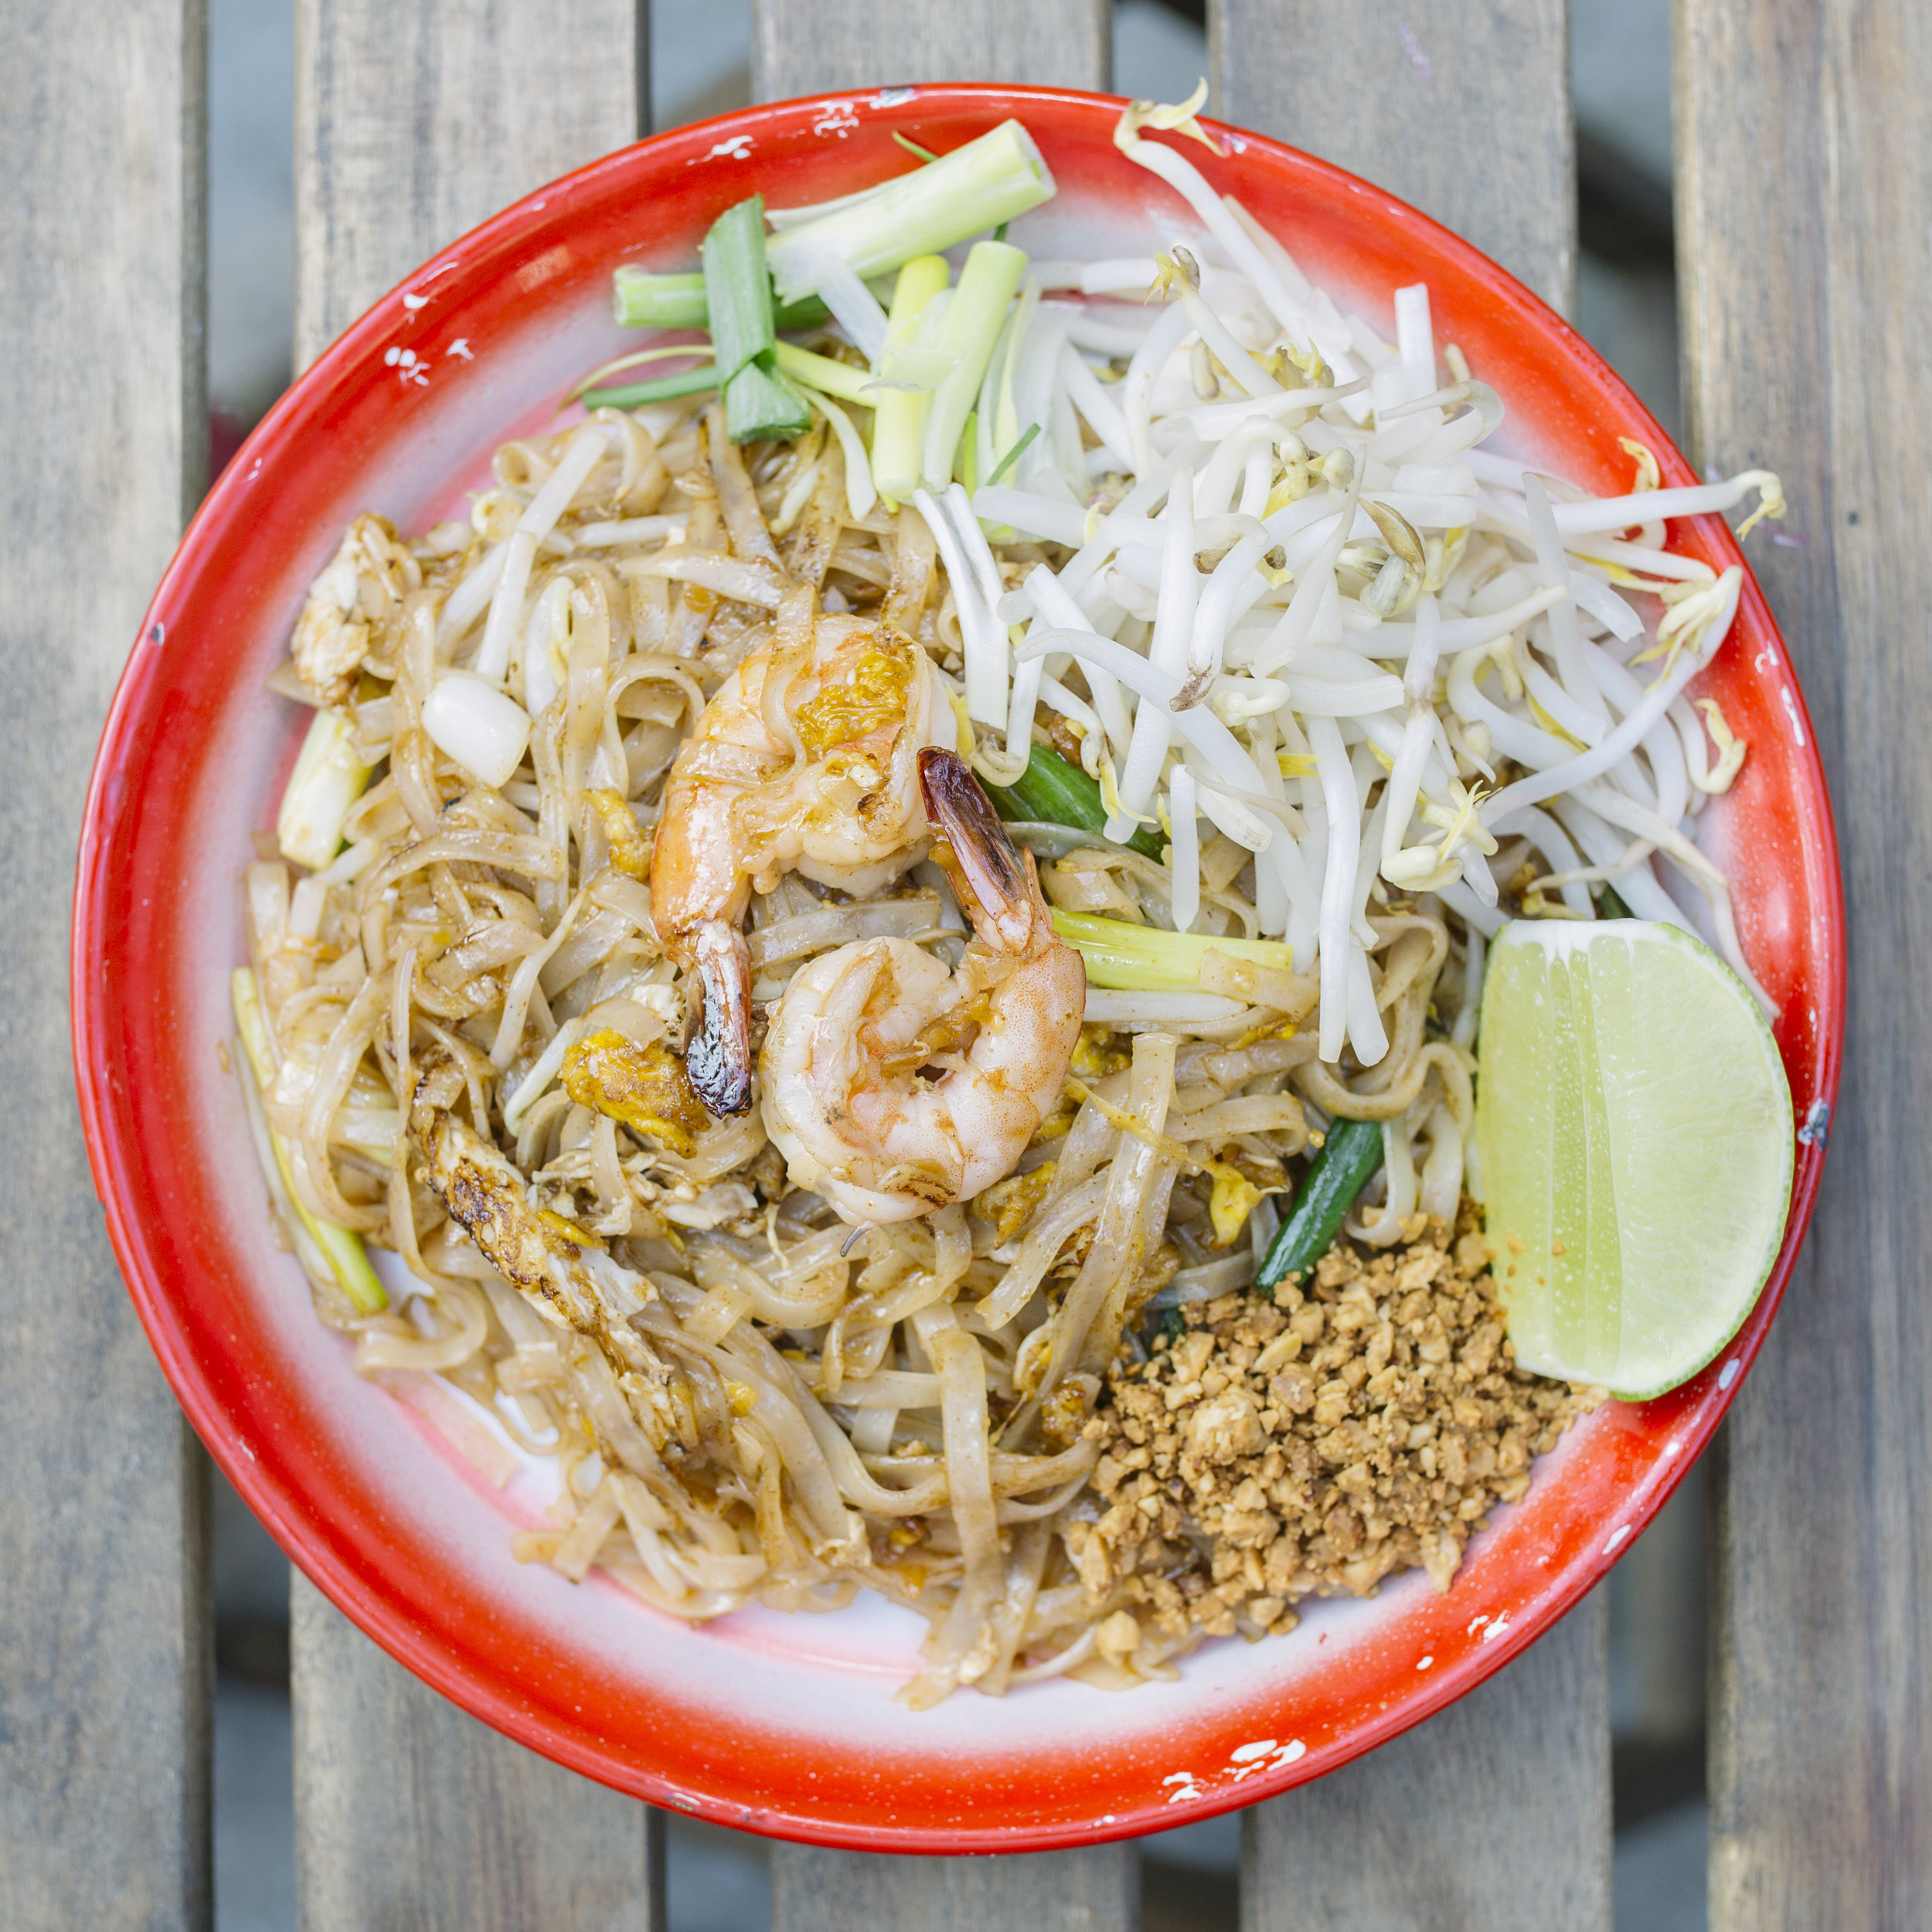 Pad Thai - Stir Fried Fresh Rice Noodles with Beansprouts, Chive, Scallion, Roasted Peanuts, and Egg